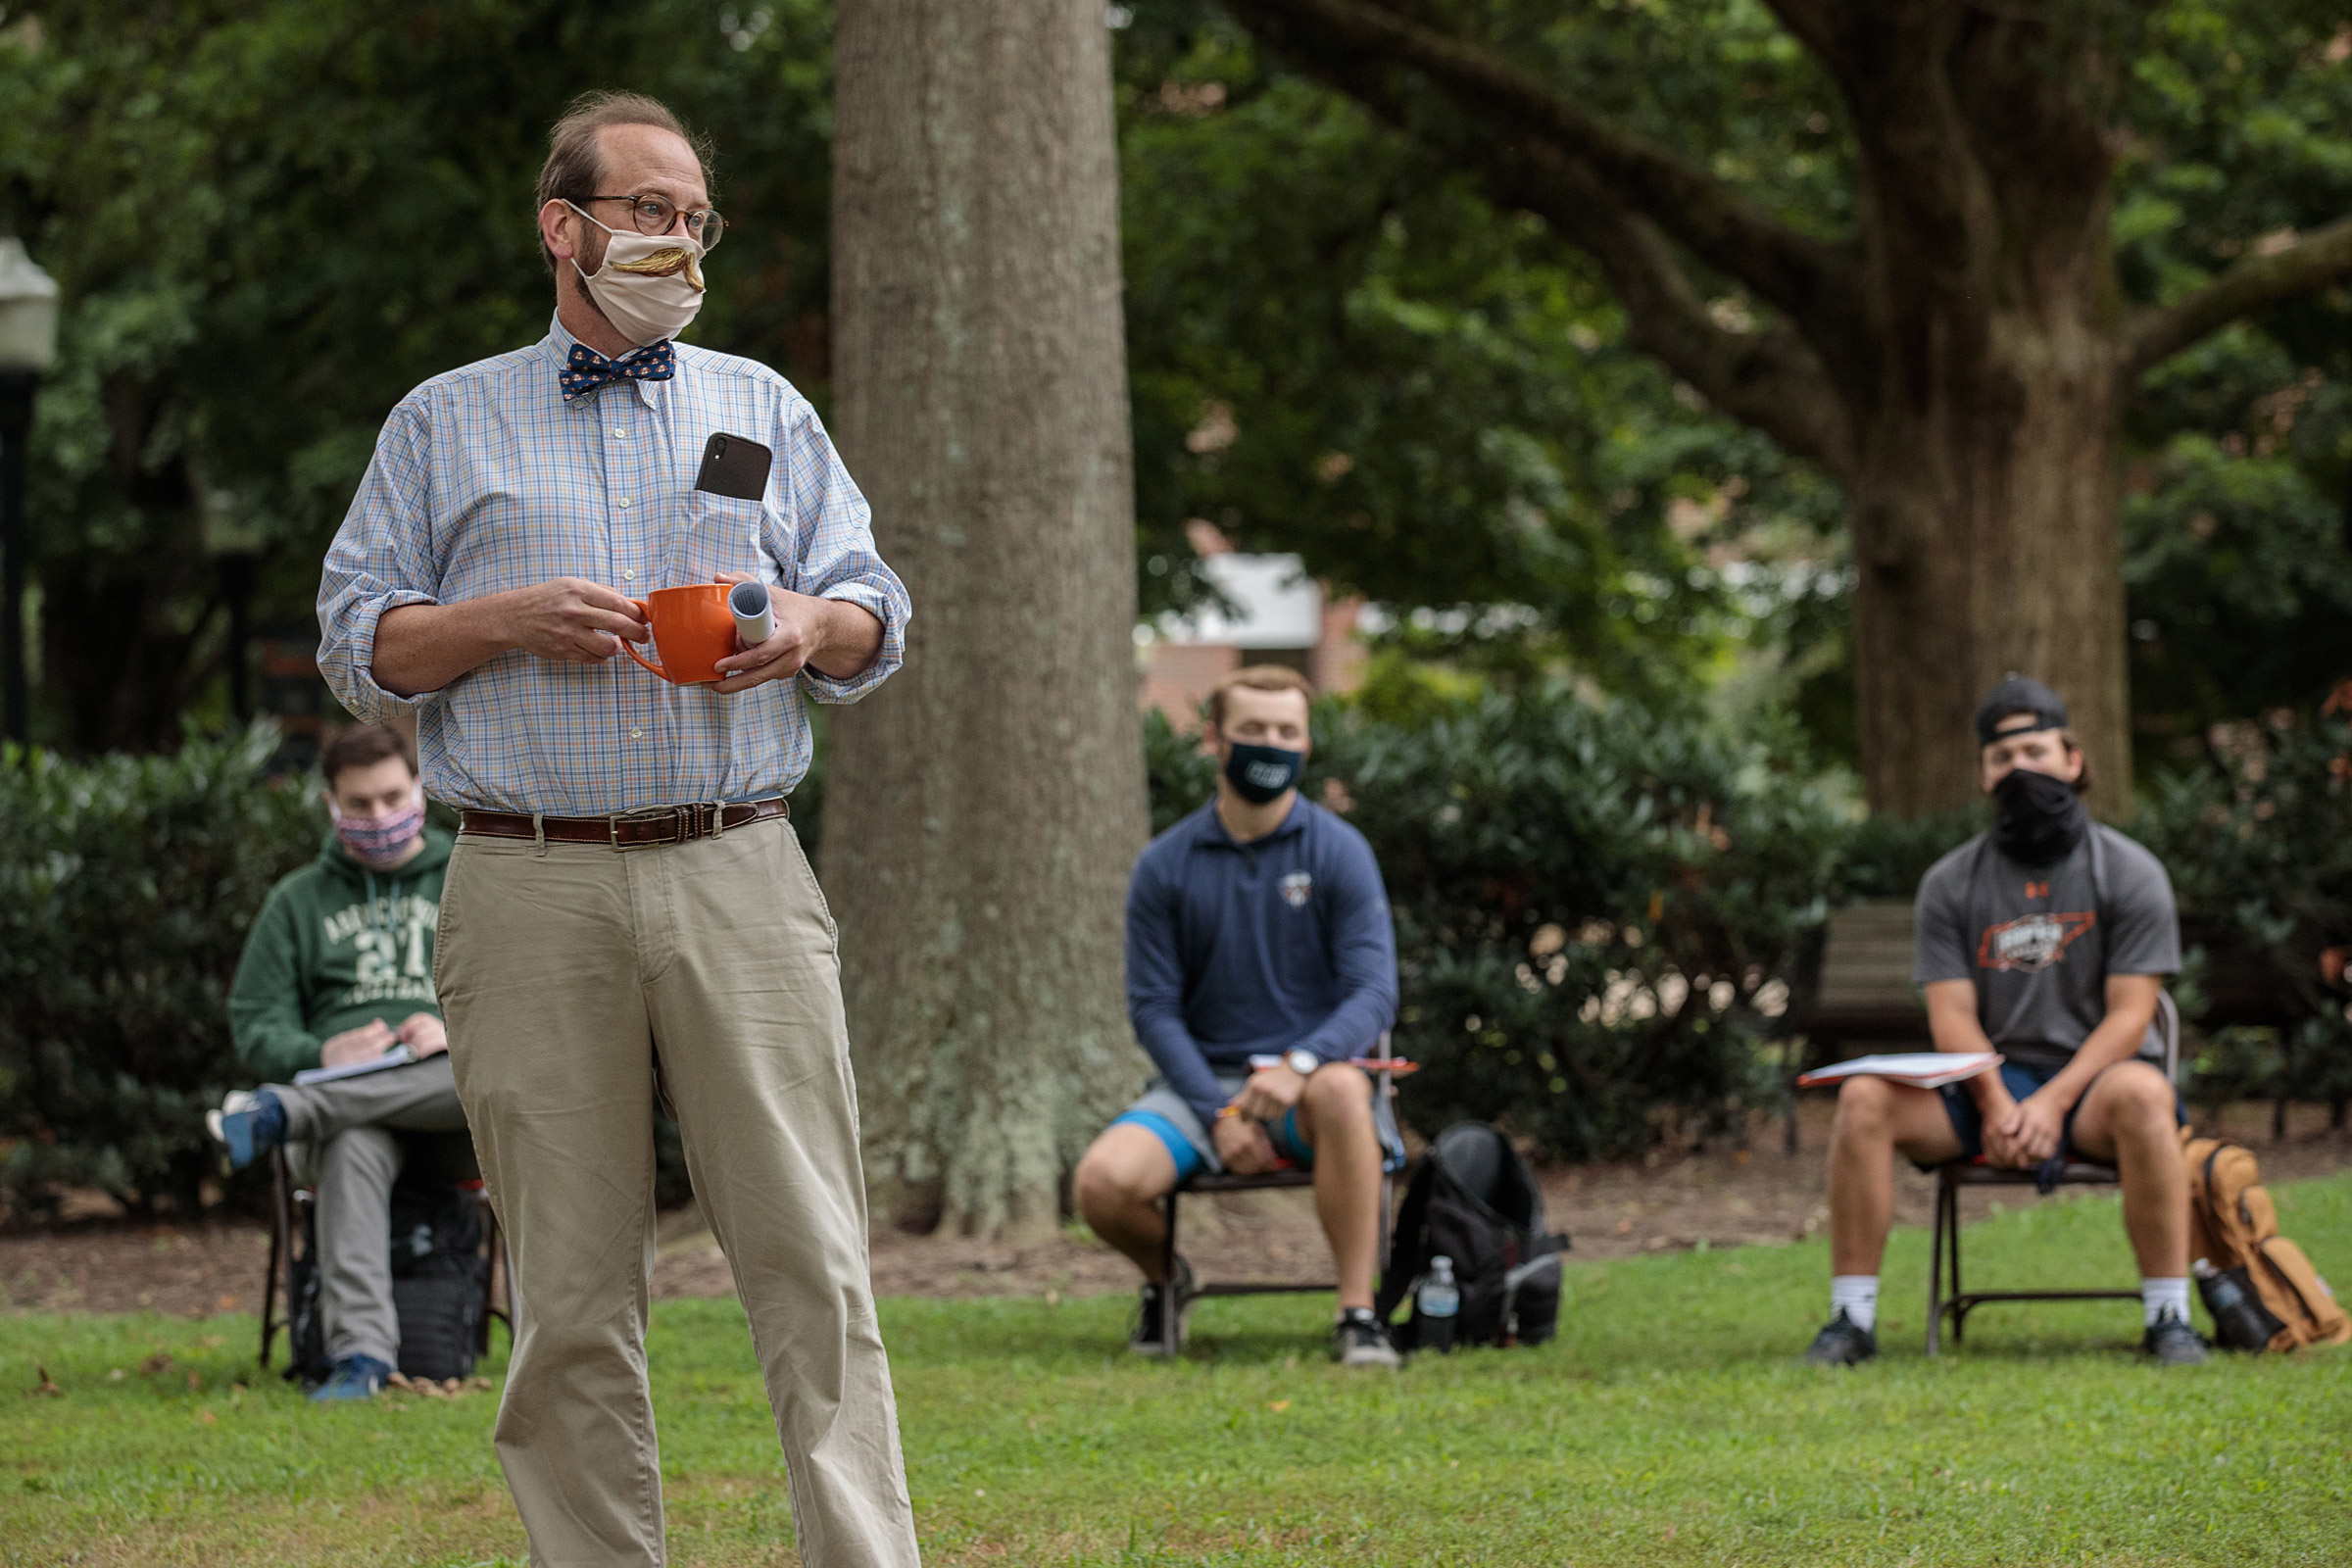 A philosophy professor lectures outdoors, wearing a bowtie and a face mask with a false mustache